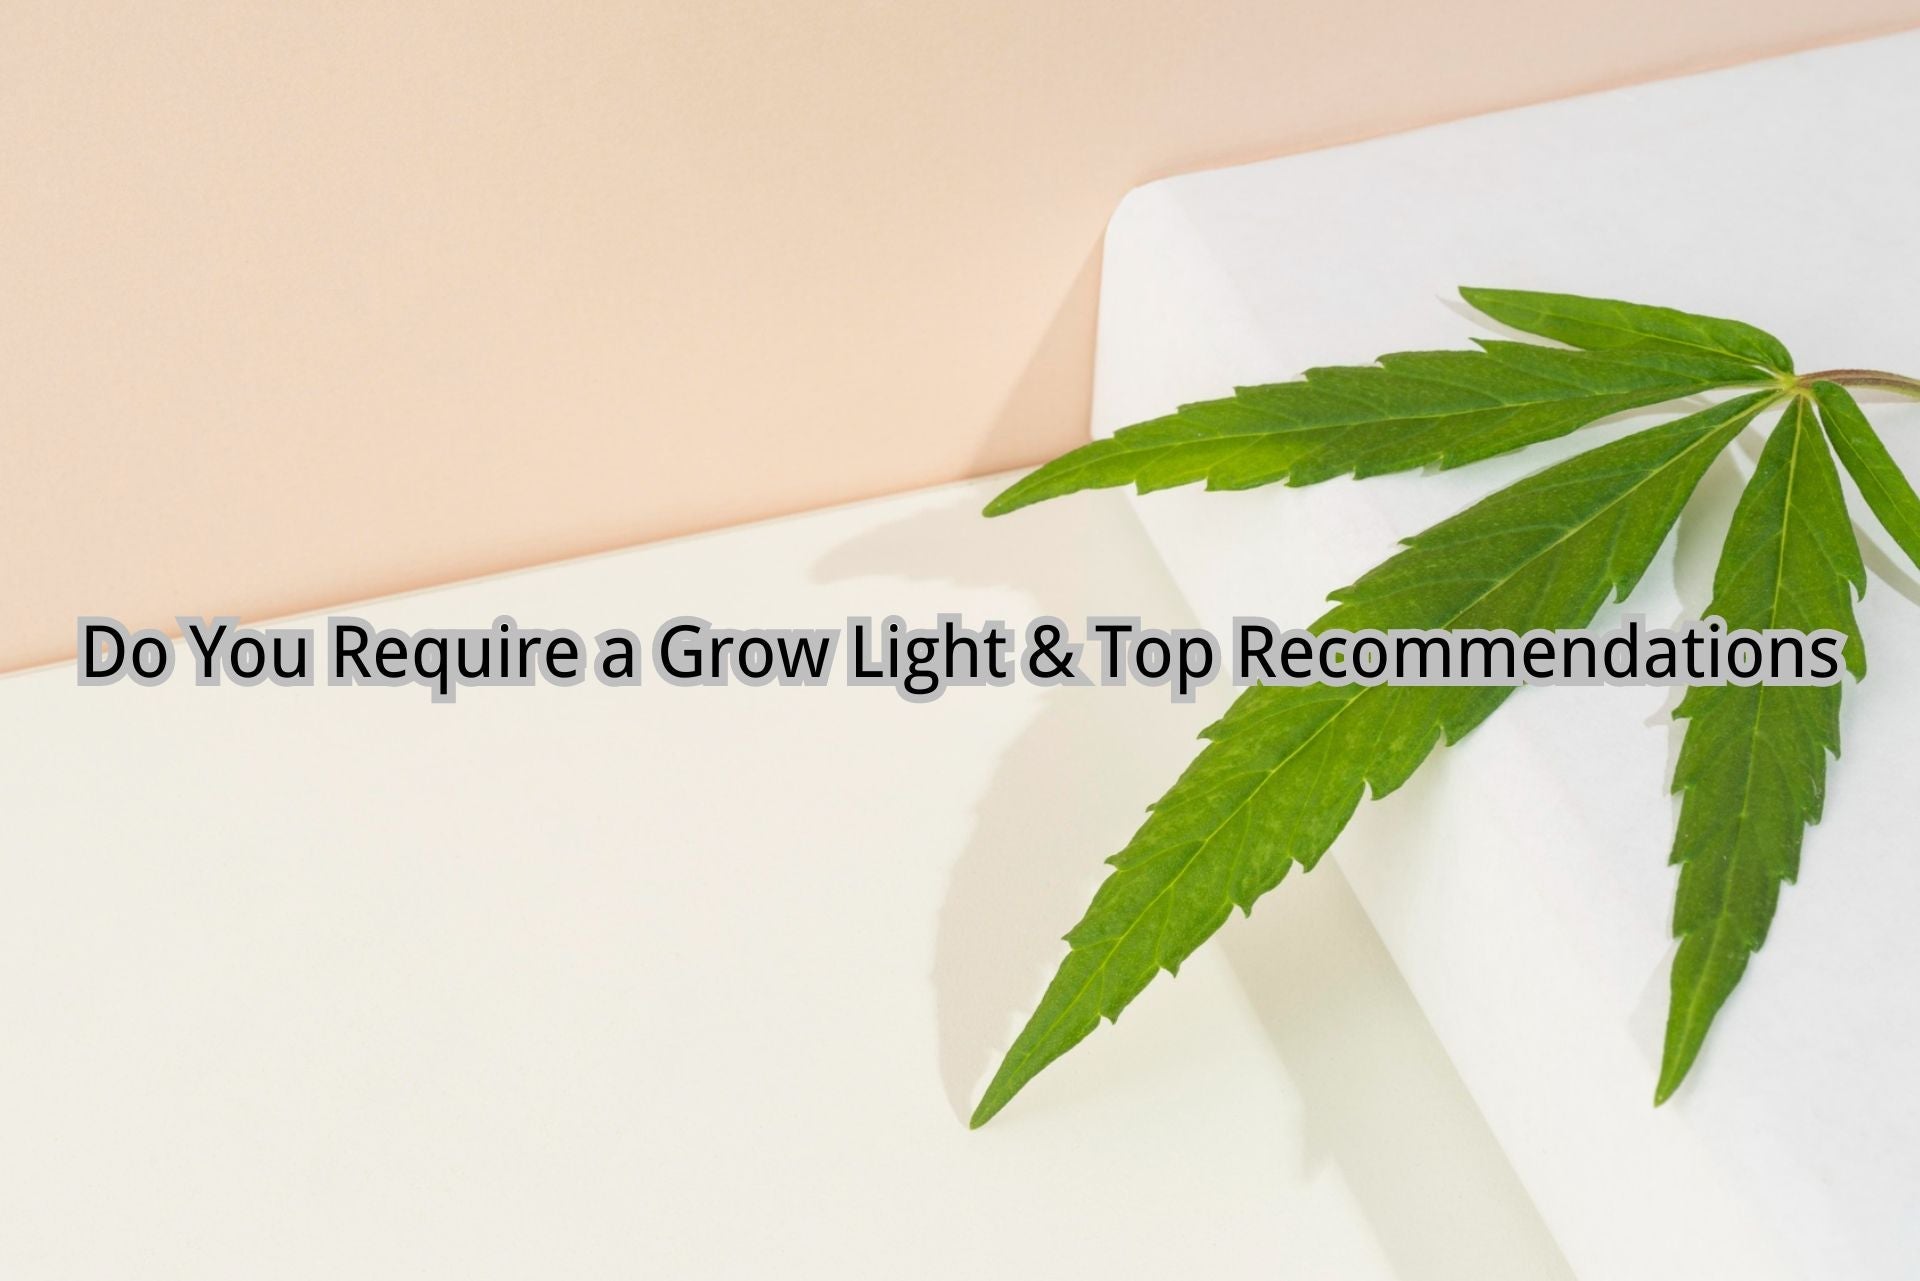 Do You Require a Grow Light & Top Recommendations